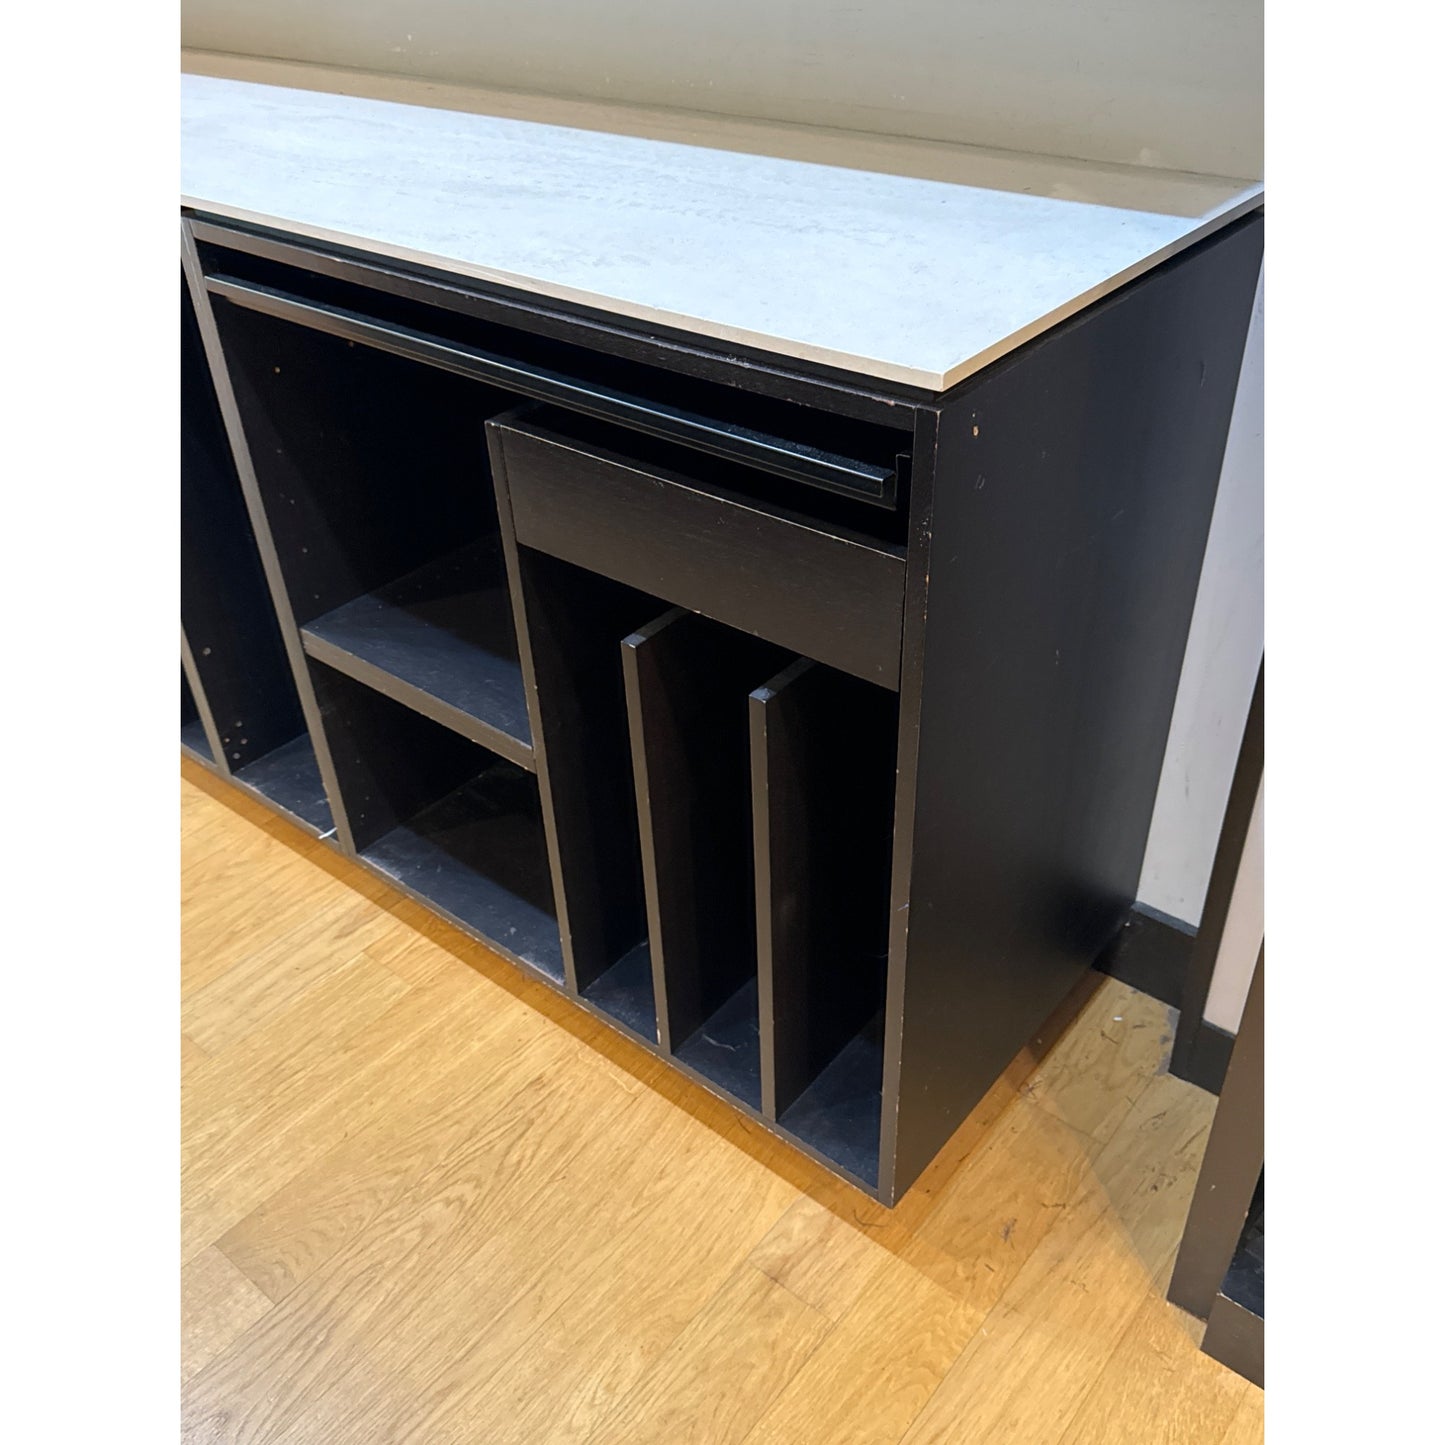 Countertop with Drawers & Storage